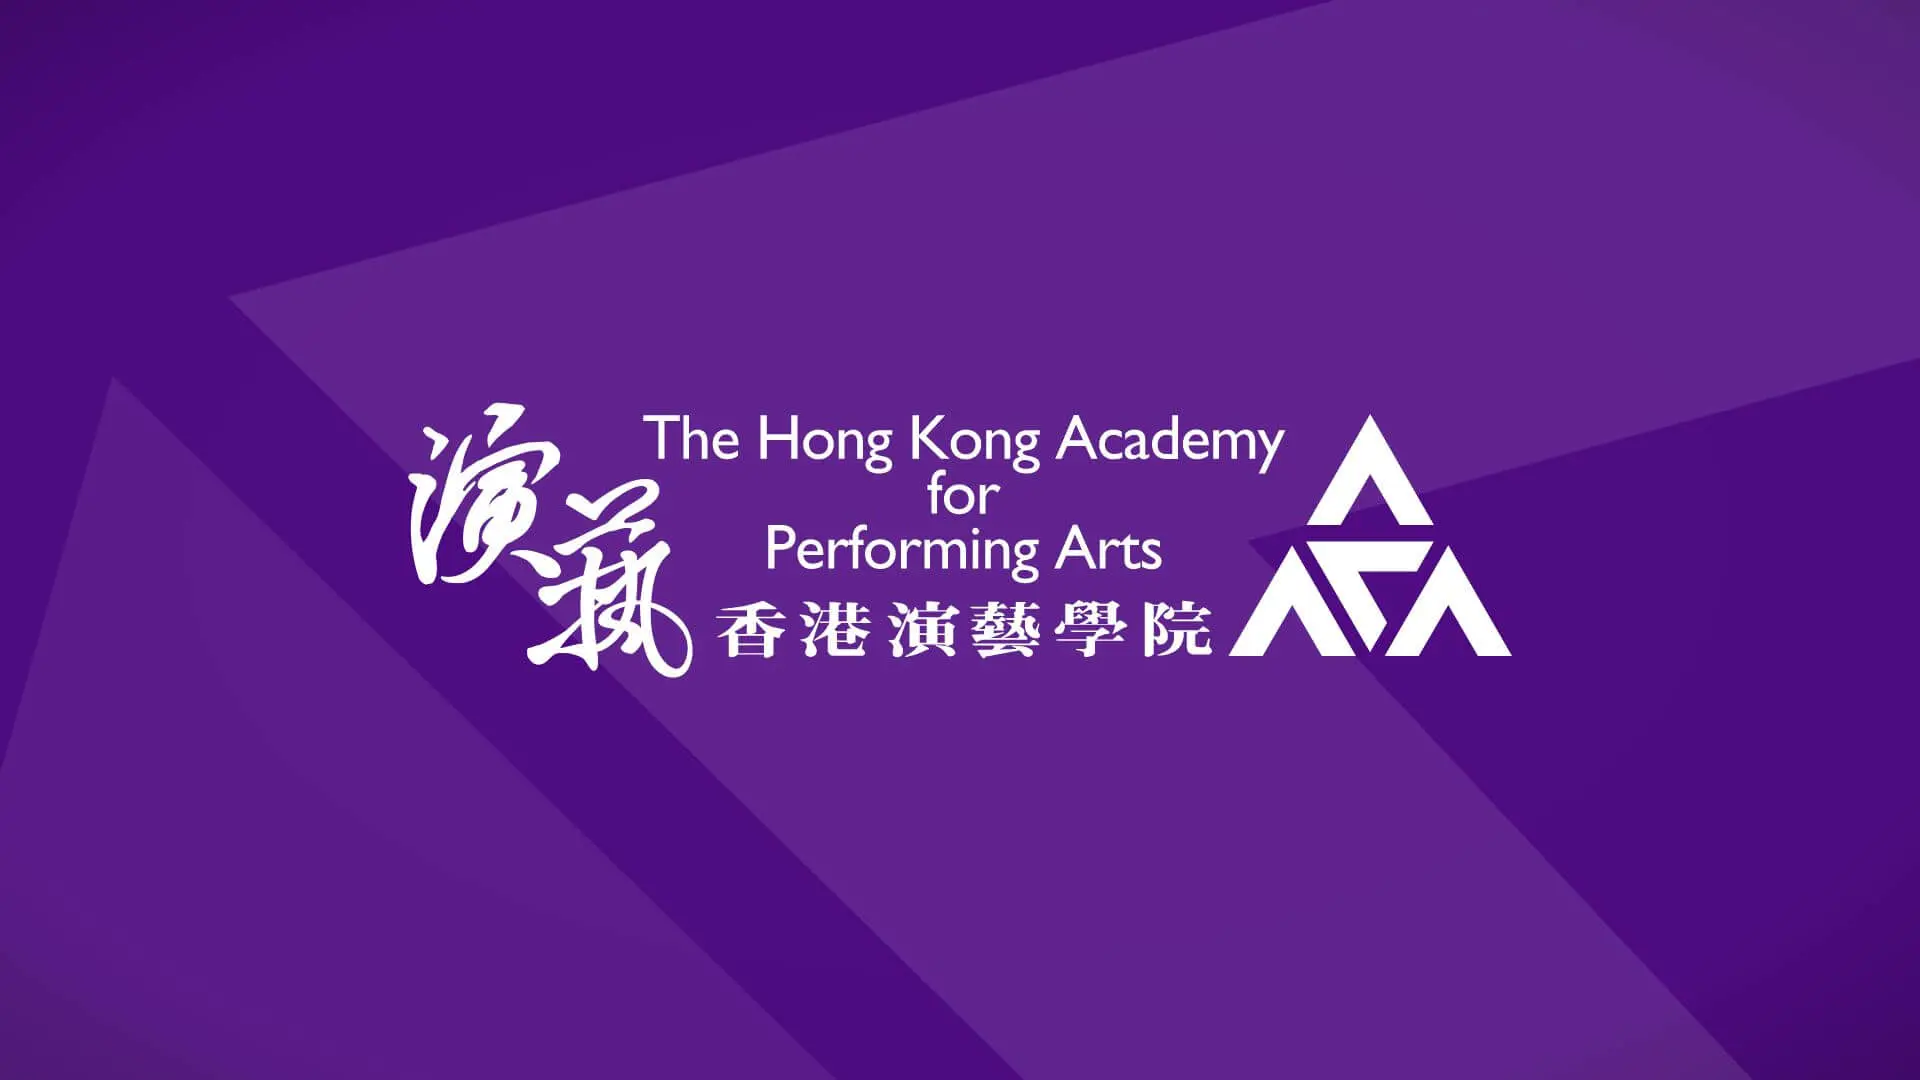 (Cancelled) Academy Postgraduate Music Lecture-Recital - Law Ho-yan (Zheng)